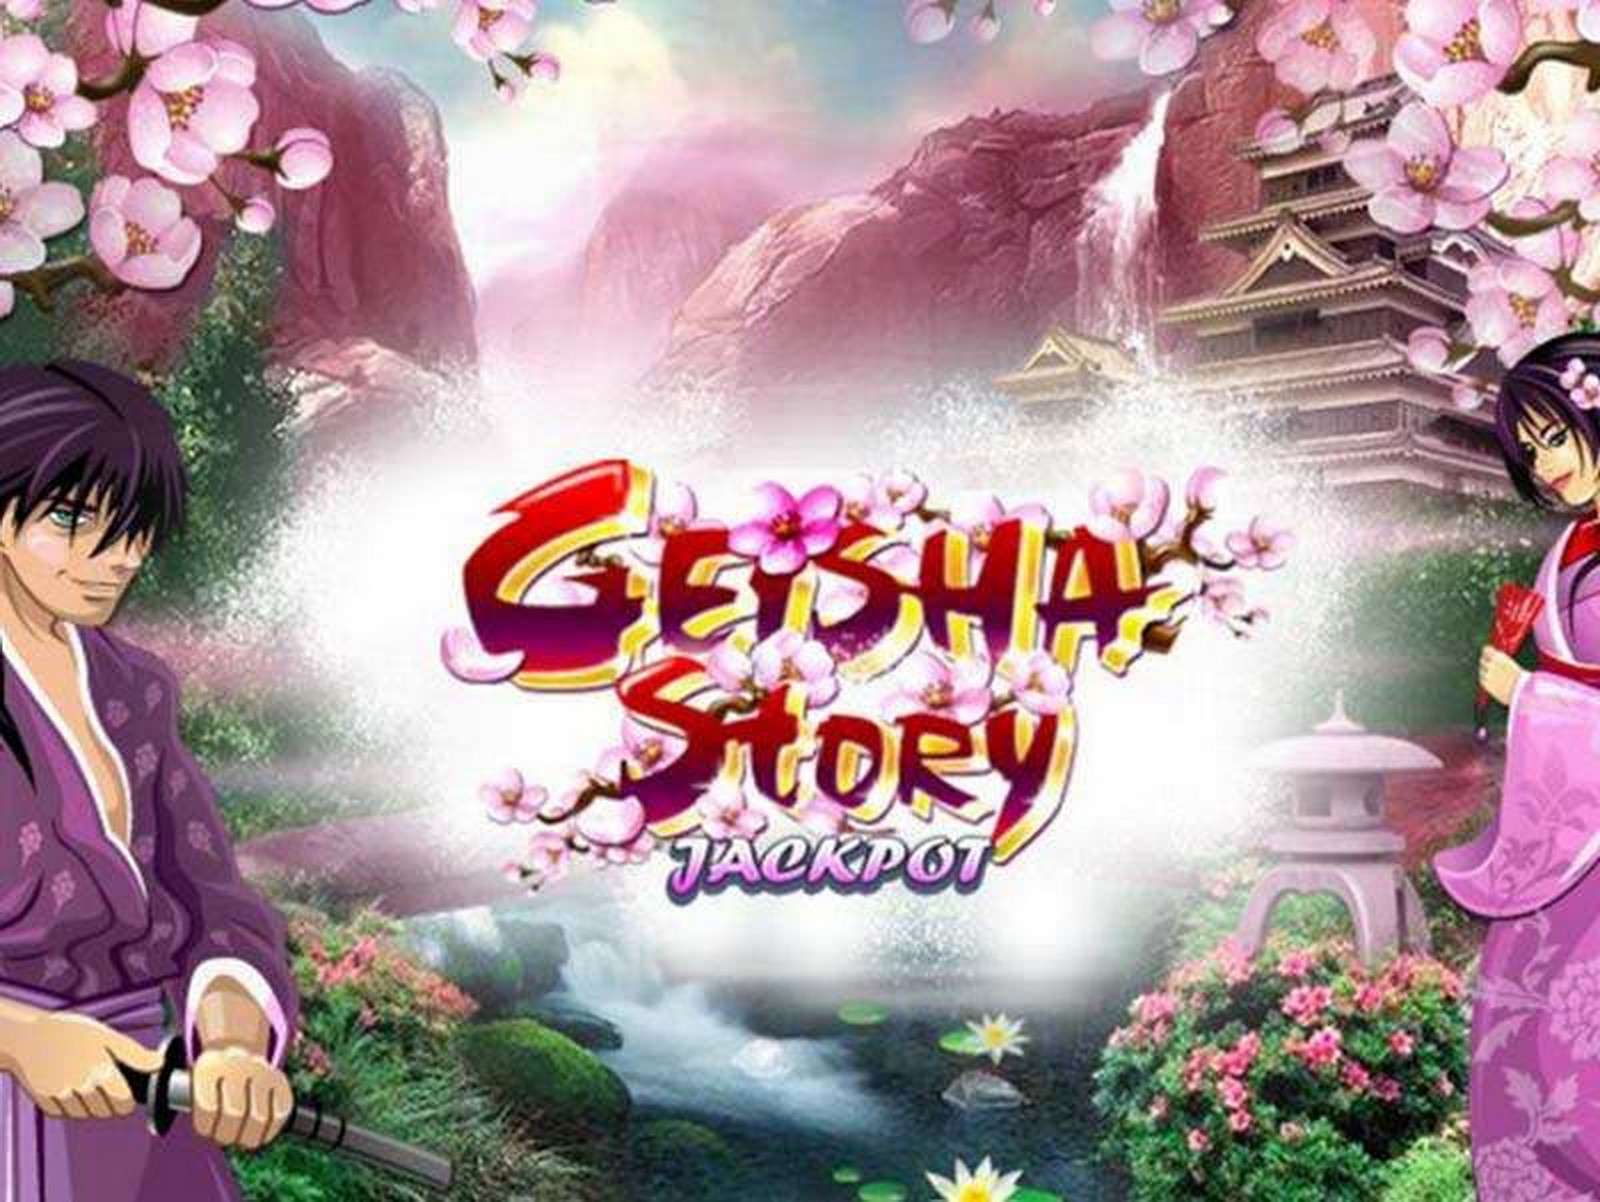 The Geisha Story JP Online Slot Demo Game by Playtech